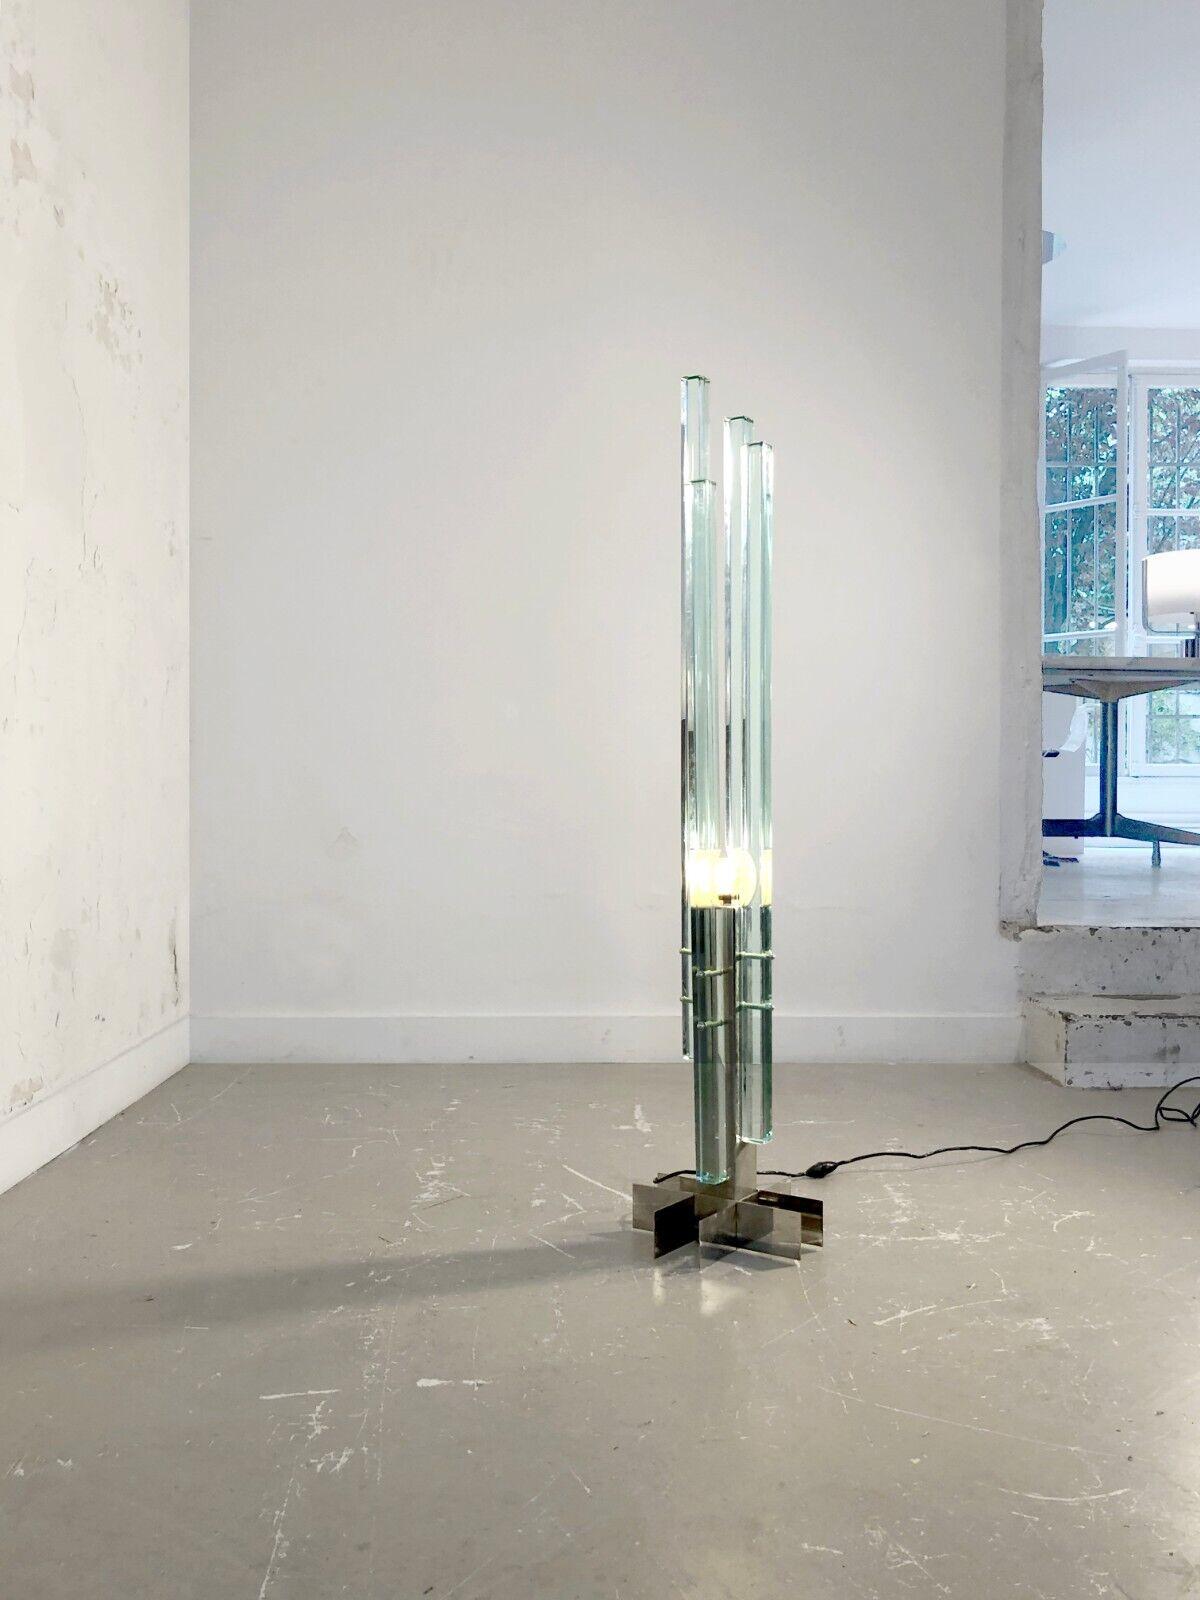 An exceptional floor lamp, Post-Modern, Radical, Constructivist, Sculptural and Kinetic, base in chromed metal strips screwed in cross, holding 4 thick monoliths of translucent blueish Murano Glass, arranged around a square suspended axis, in an